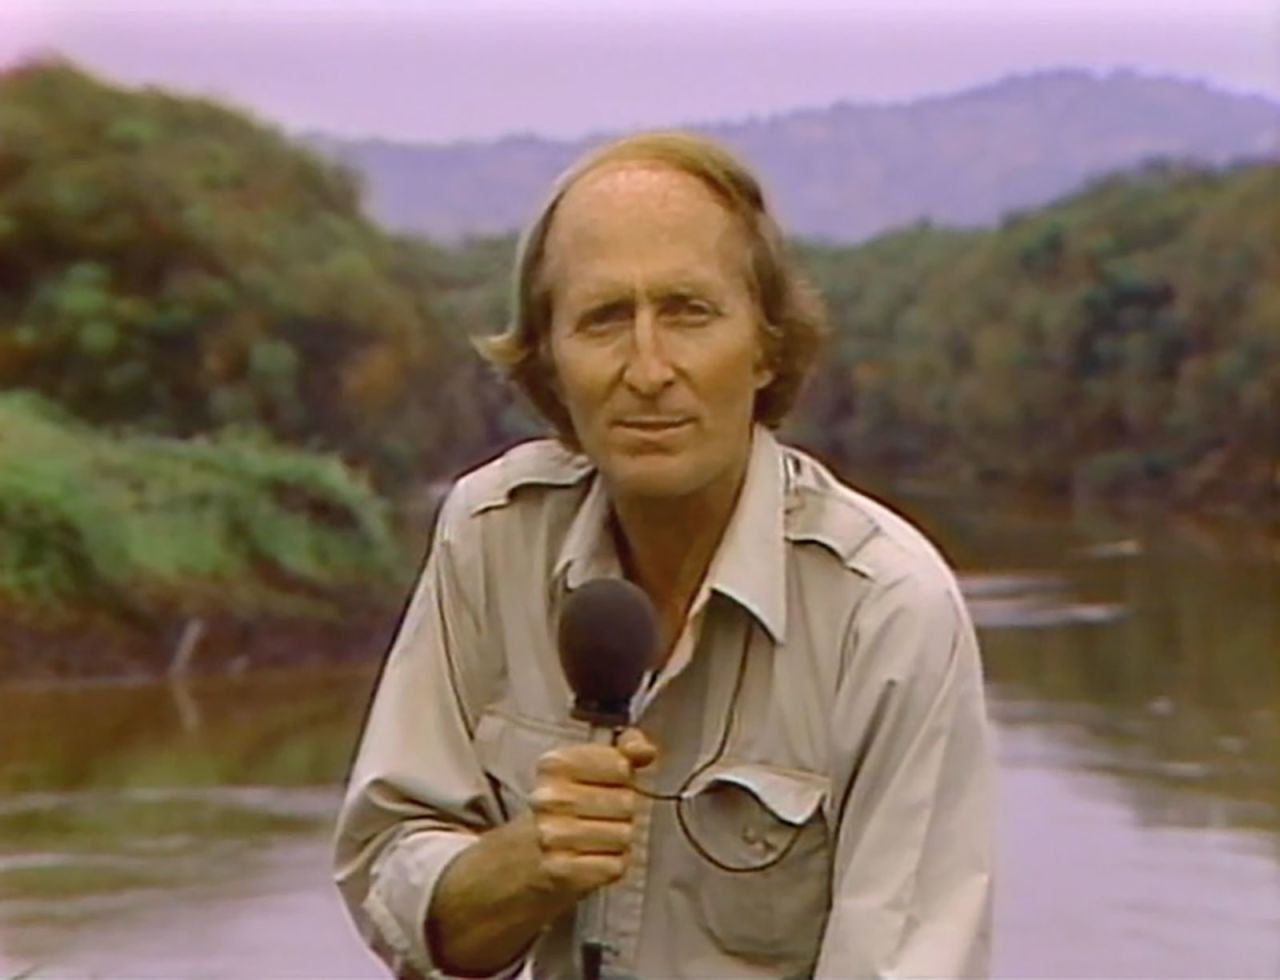 Strieker was the network's only correspondent on the African continent for some time, covering the AIDs epidemic in the 1980s and other major moments in history, including the 1994 genocide in Rwanda.   